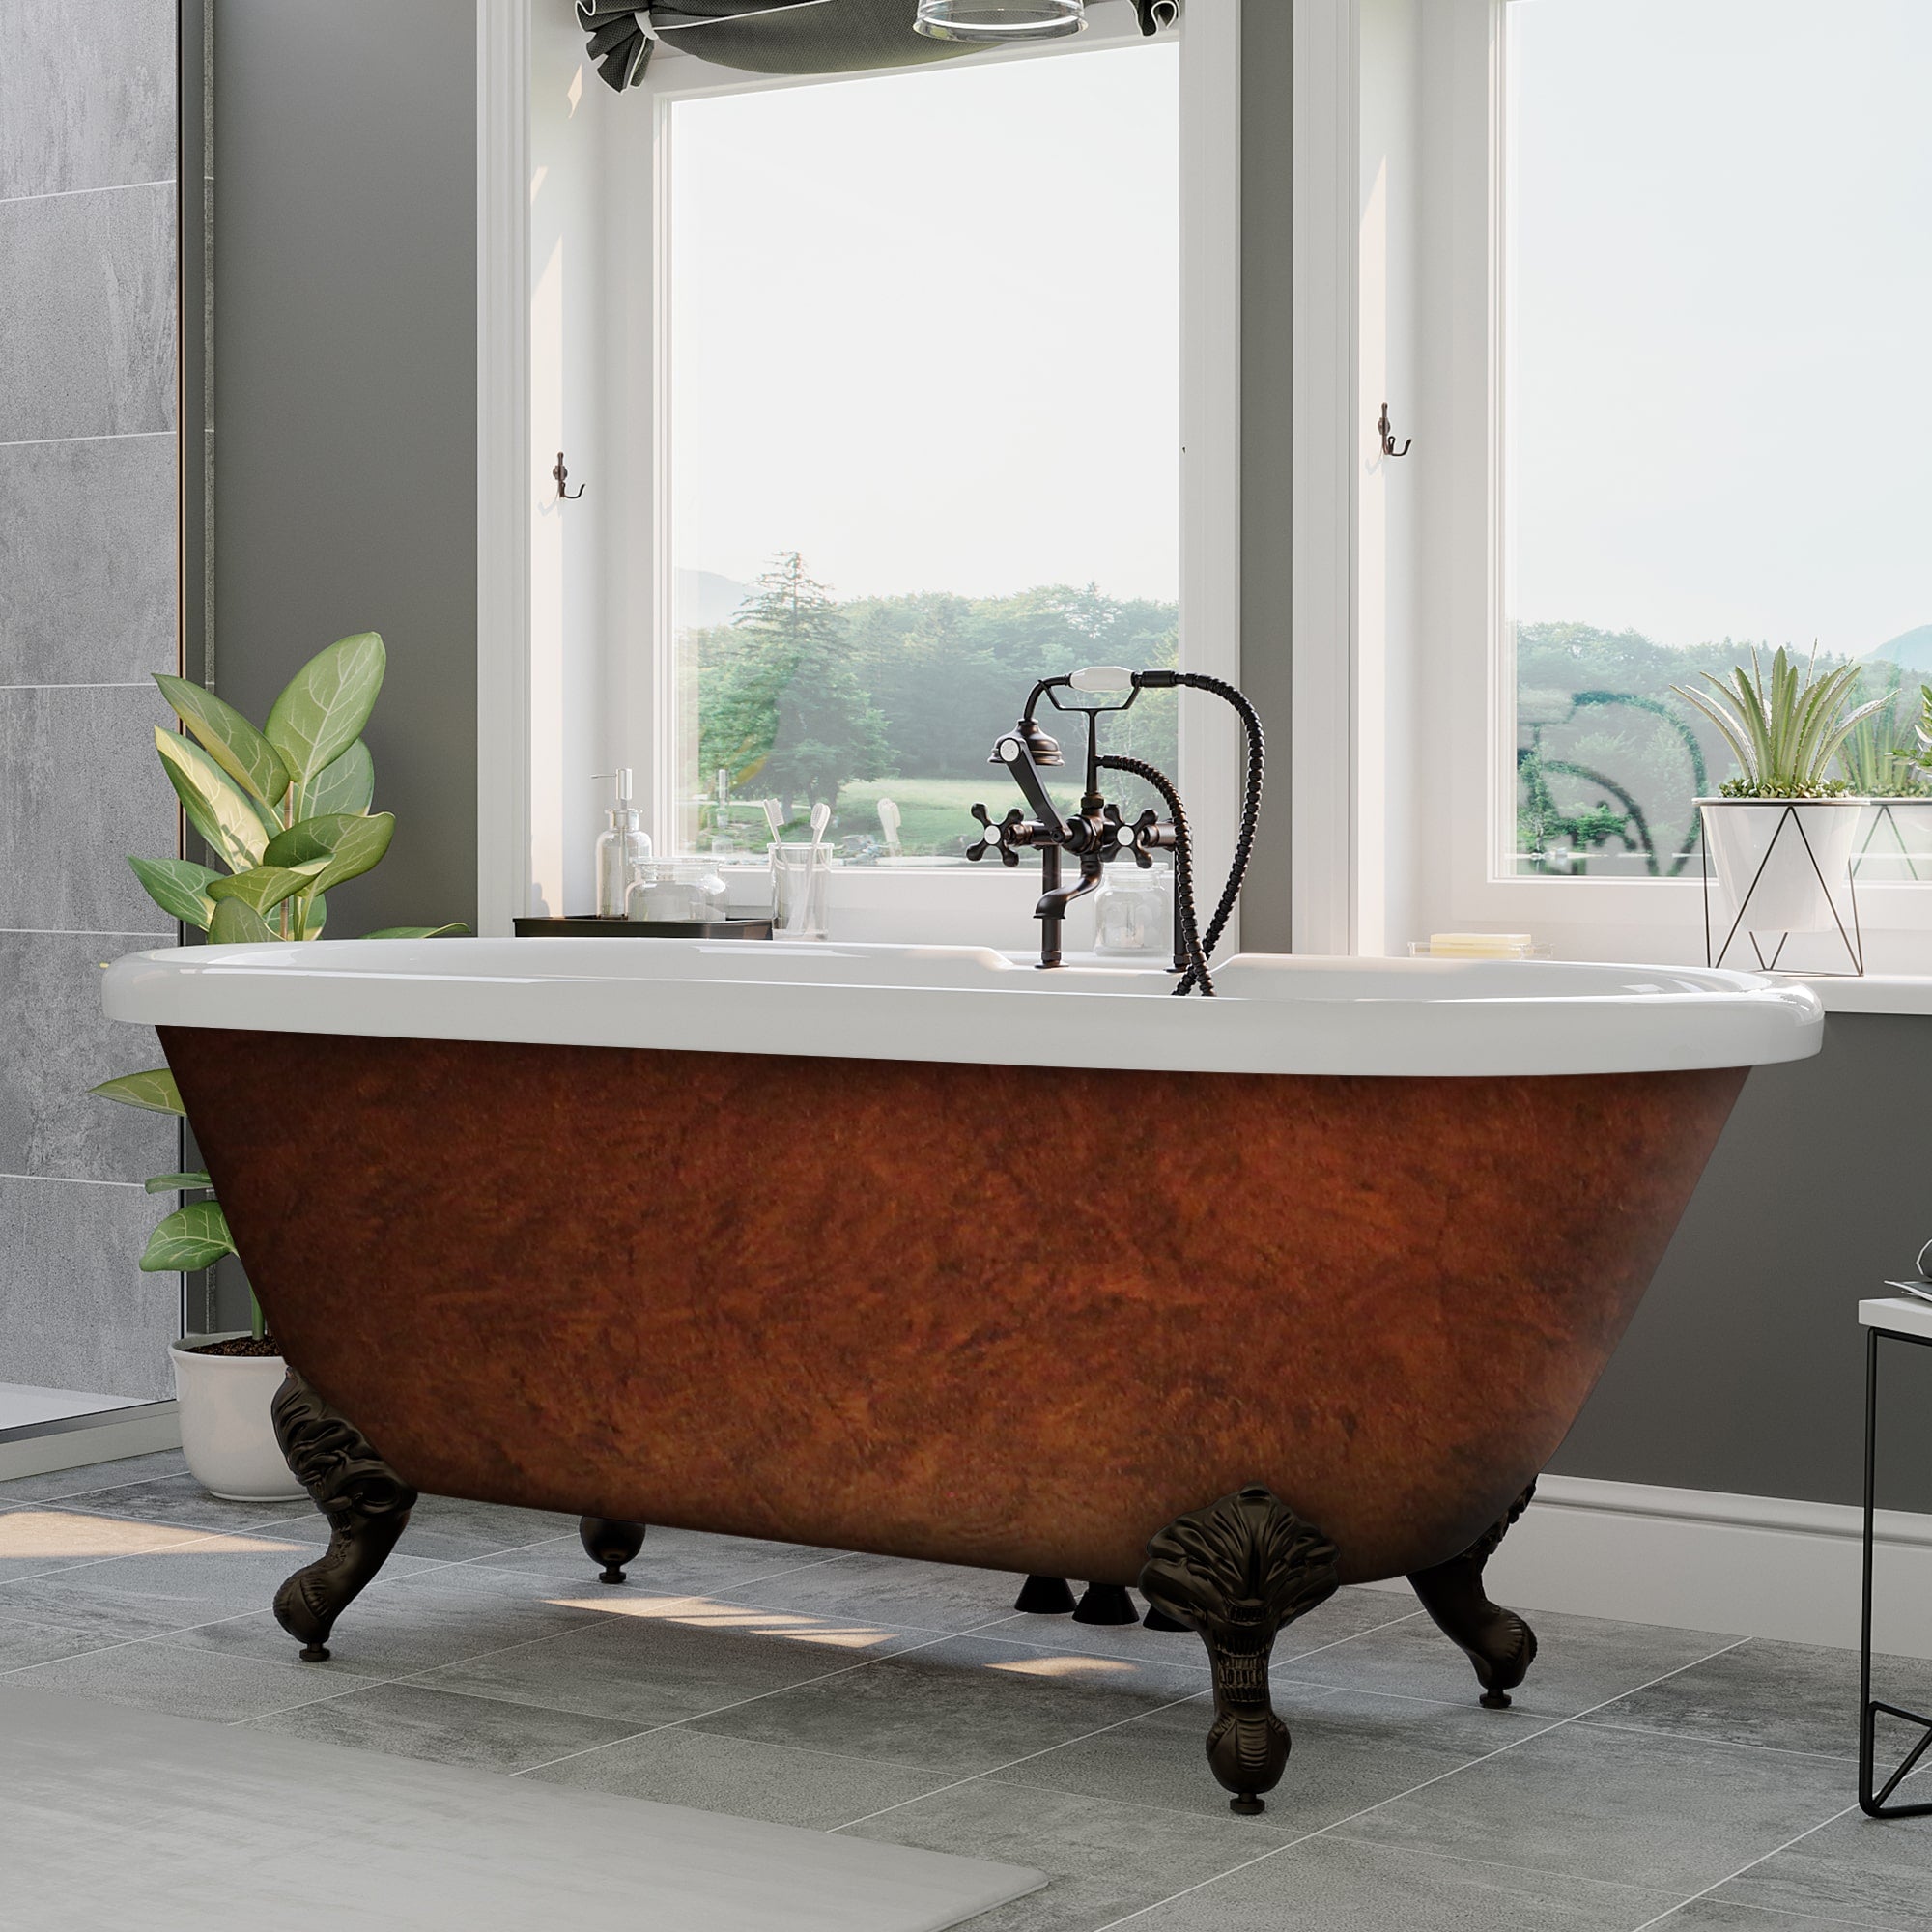 Cambridge Plumbing Double Ended Hand Painted Acrylic Clawfoot (Oil Rubbed Bronze) Bathtub ADE-DH-ORB-CB - Vital Hydrotherapy